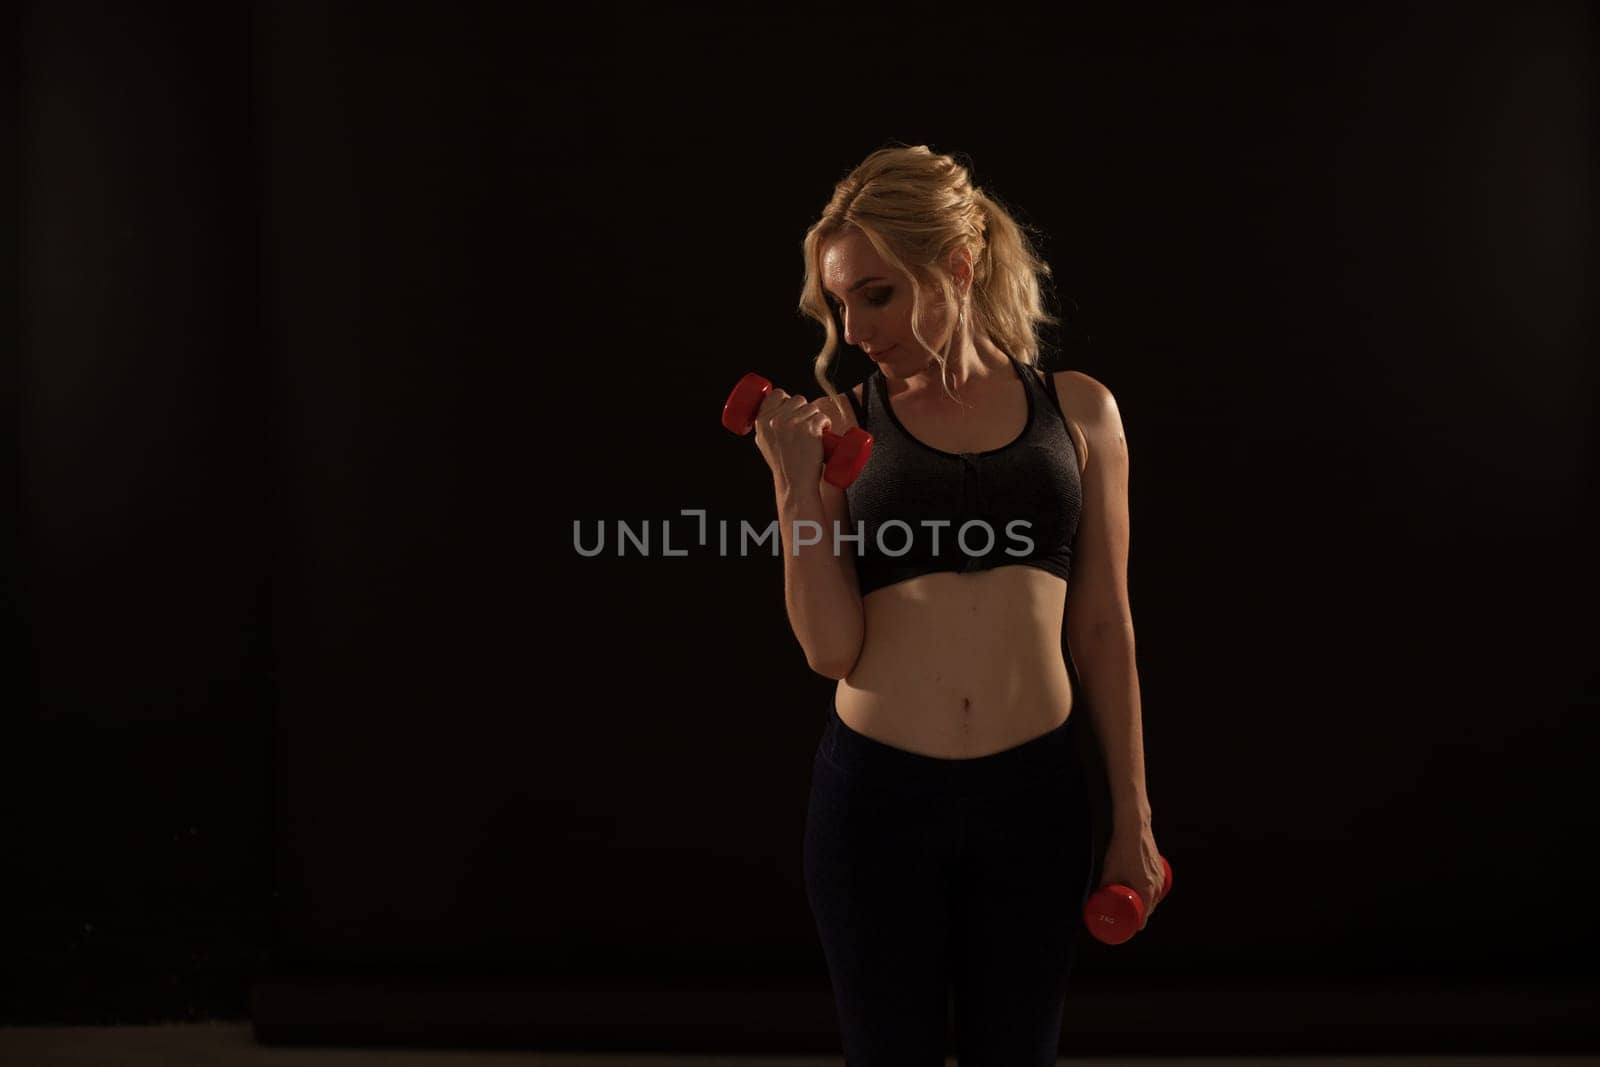 Blonde woman engaged in argument in the gym with fitness dumbbells